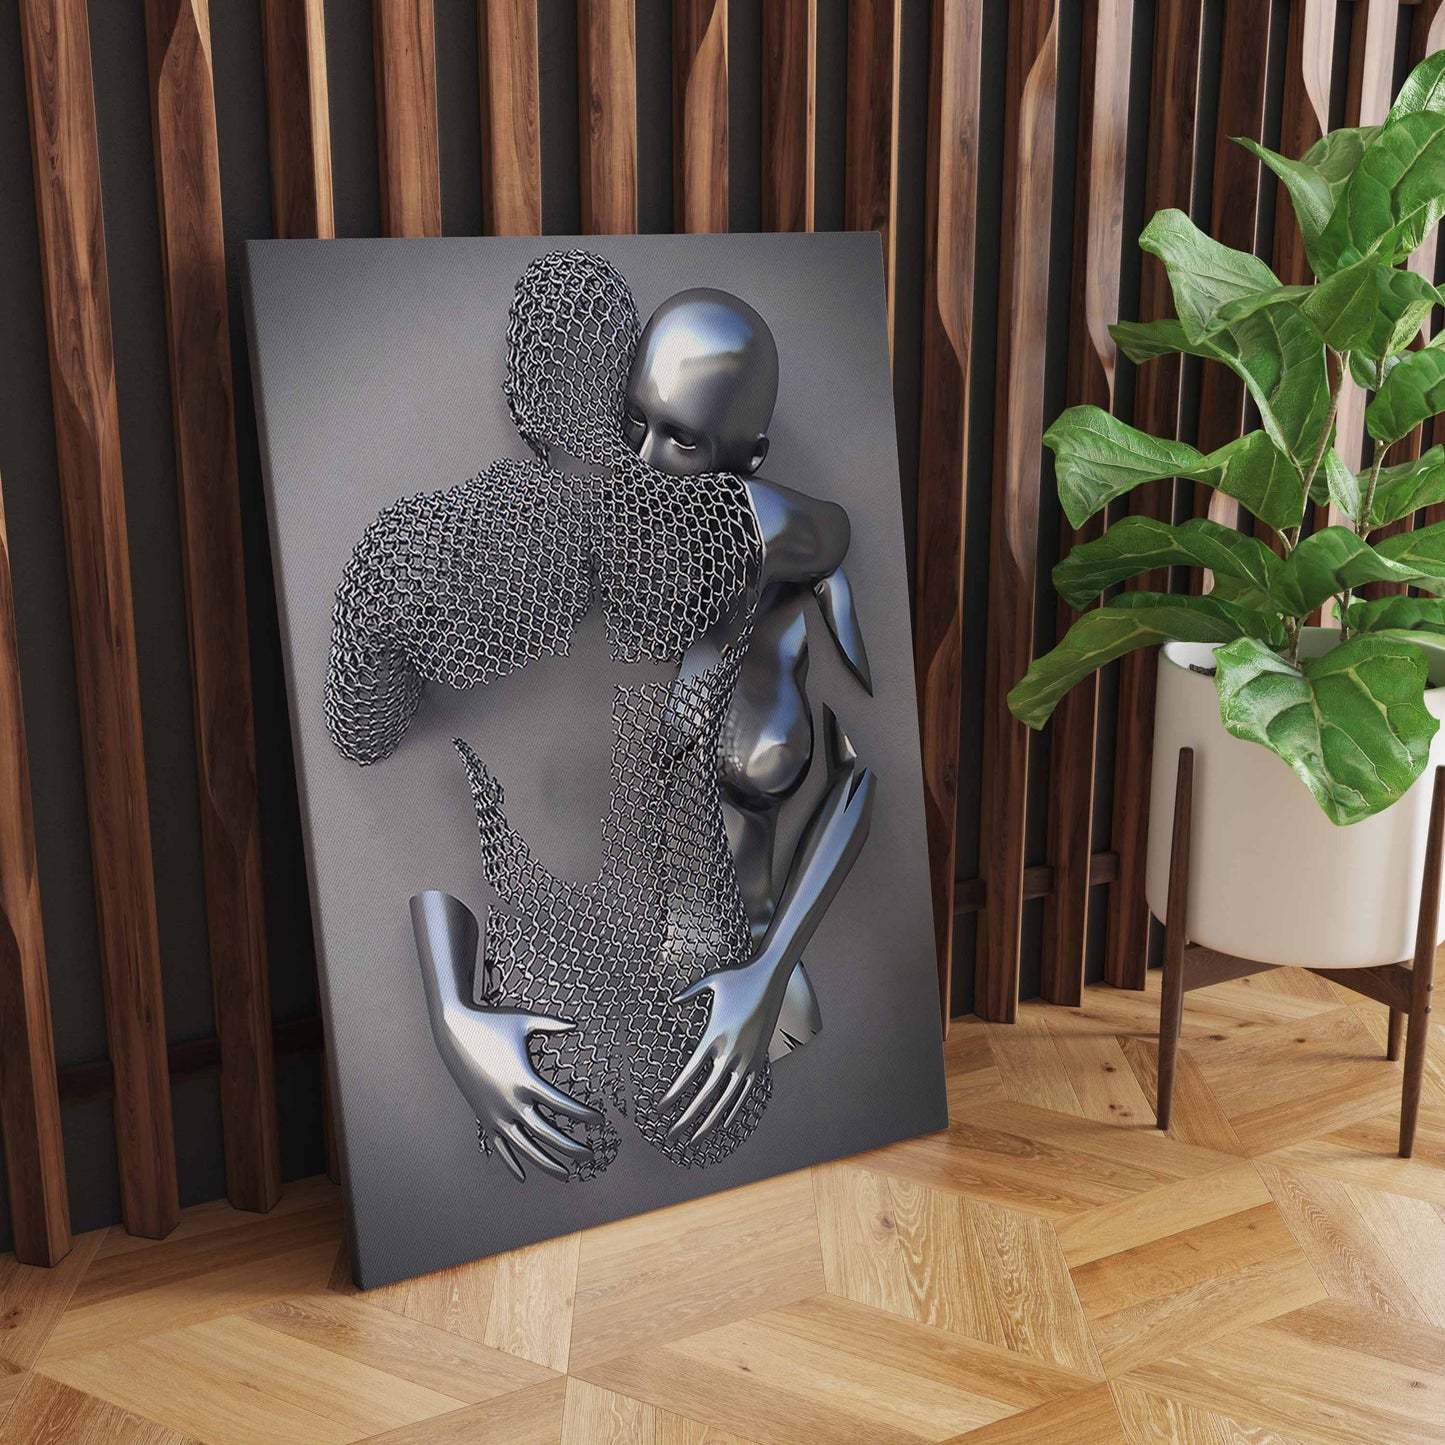 Captivating Metal Figure Statue wall art printings, Romantic Abstract design and Prints for Modern Living Rooms S04E16